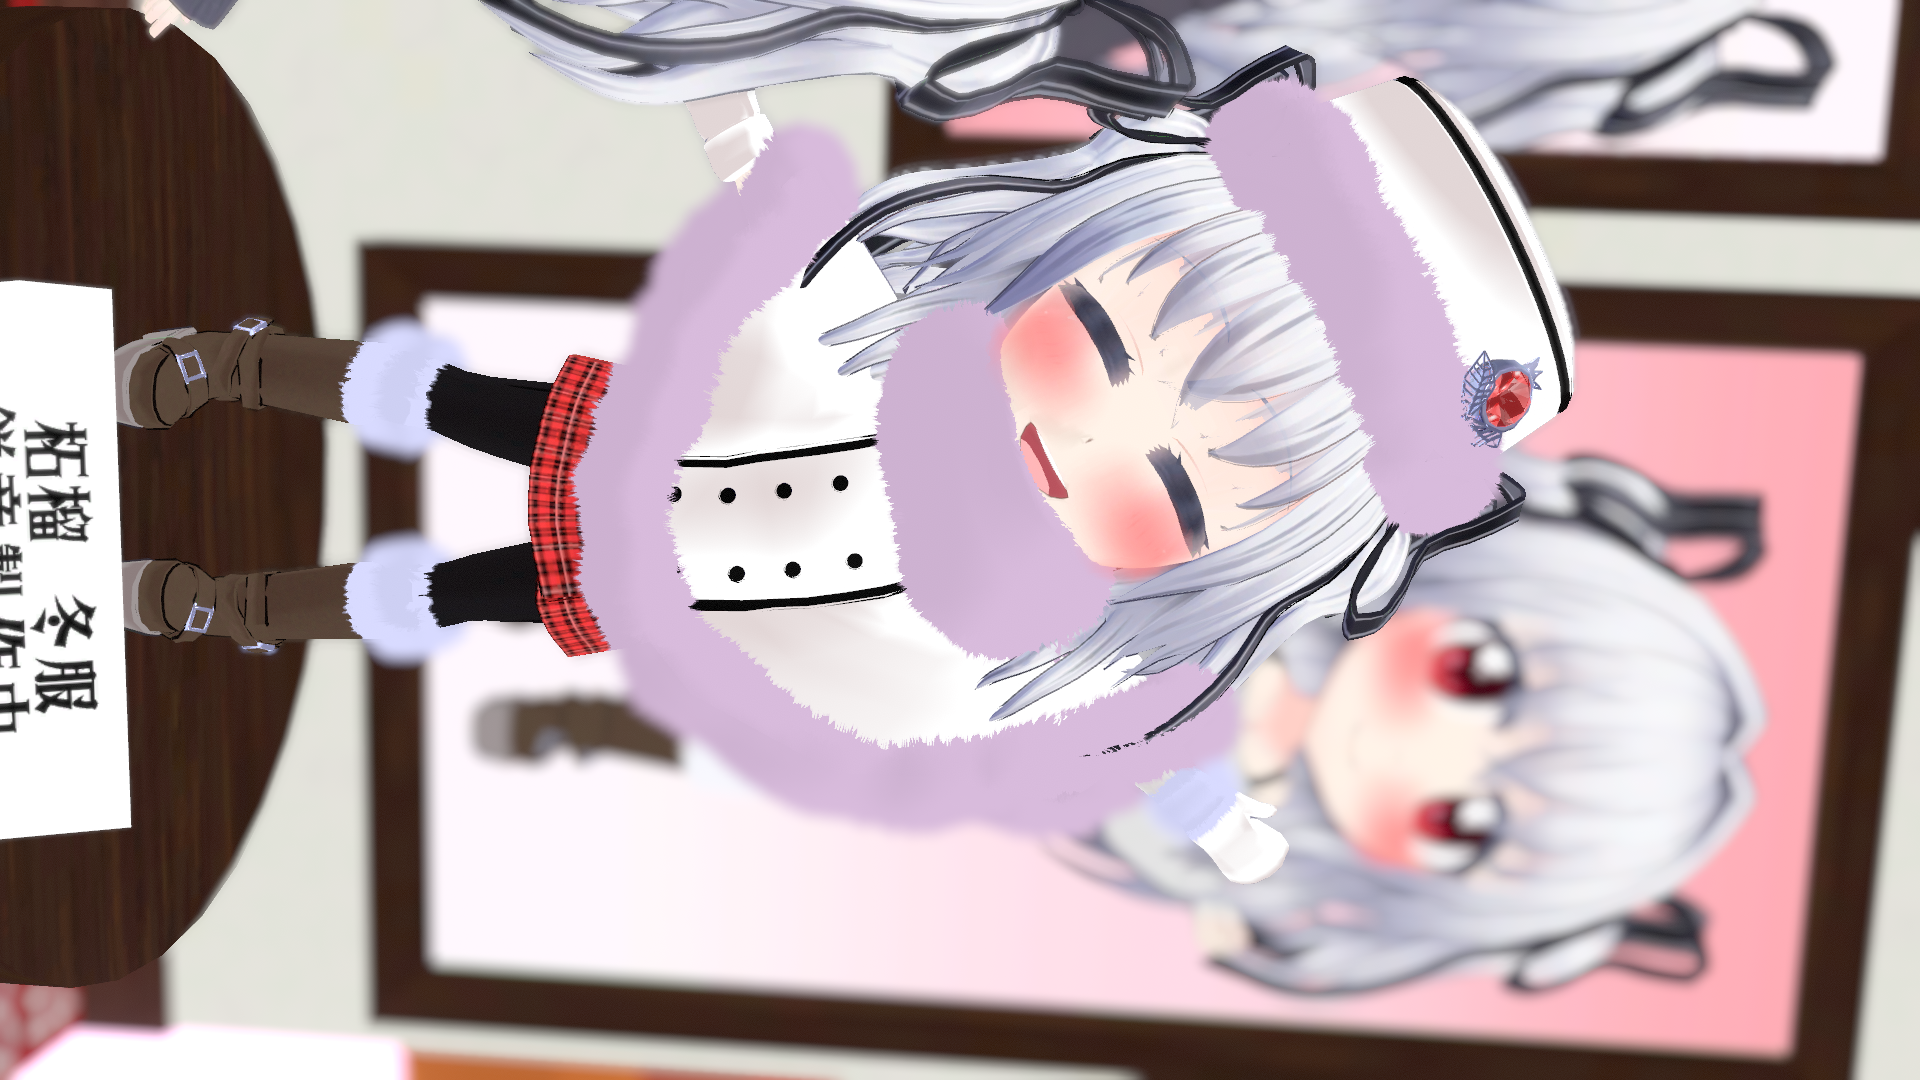 VRChat_1920x1080_2021-12-05_05-09-31.947.png